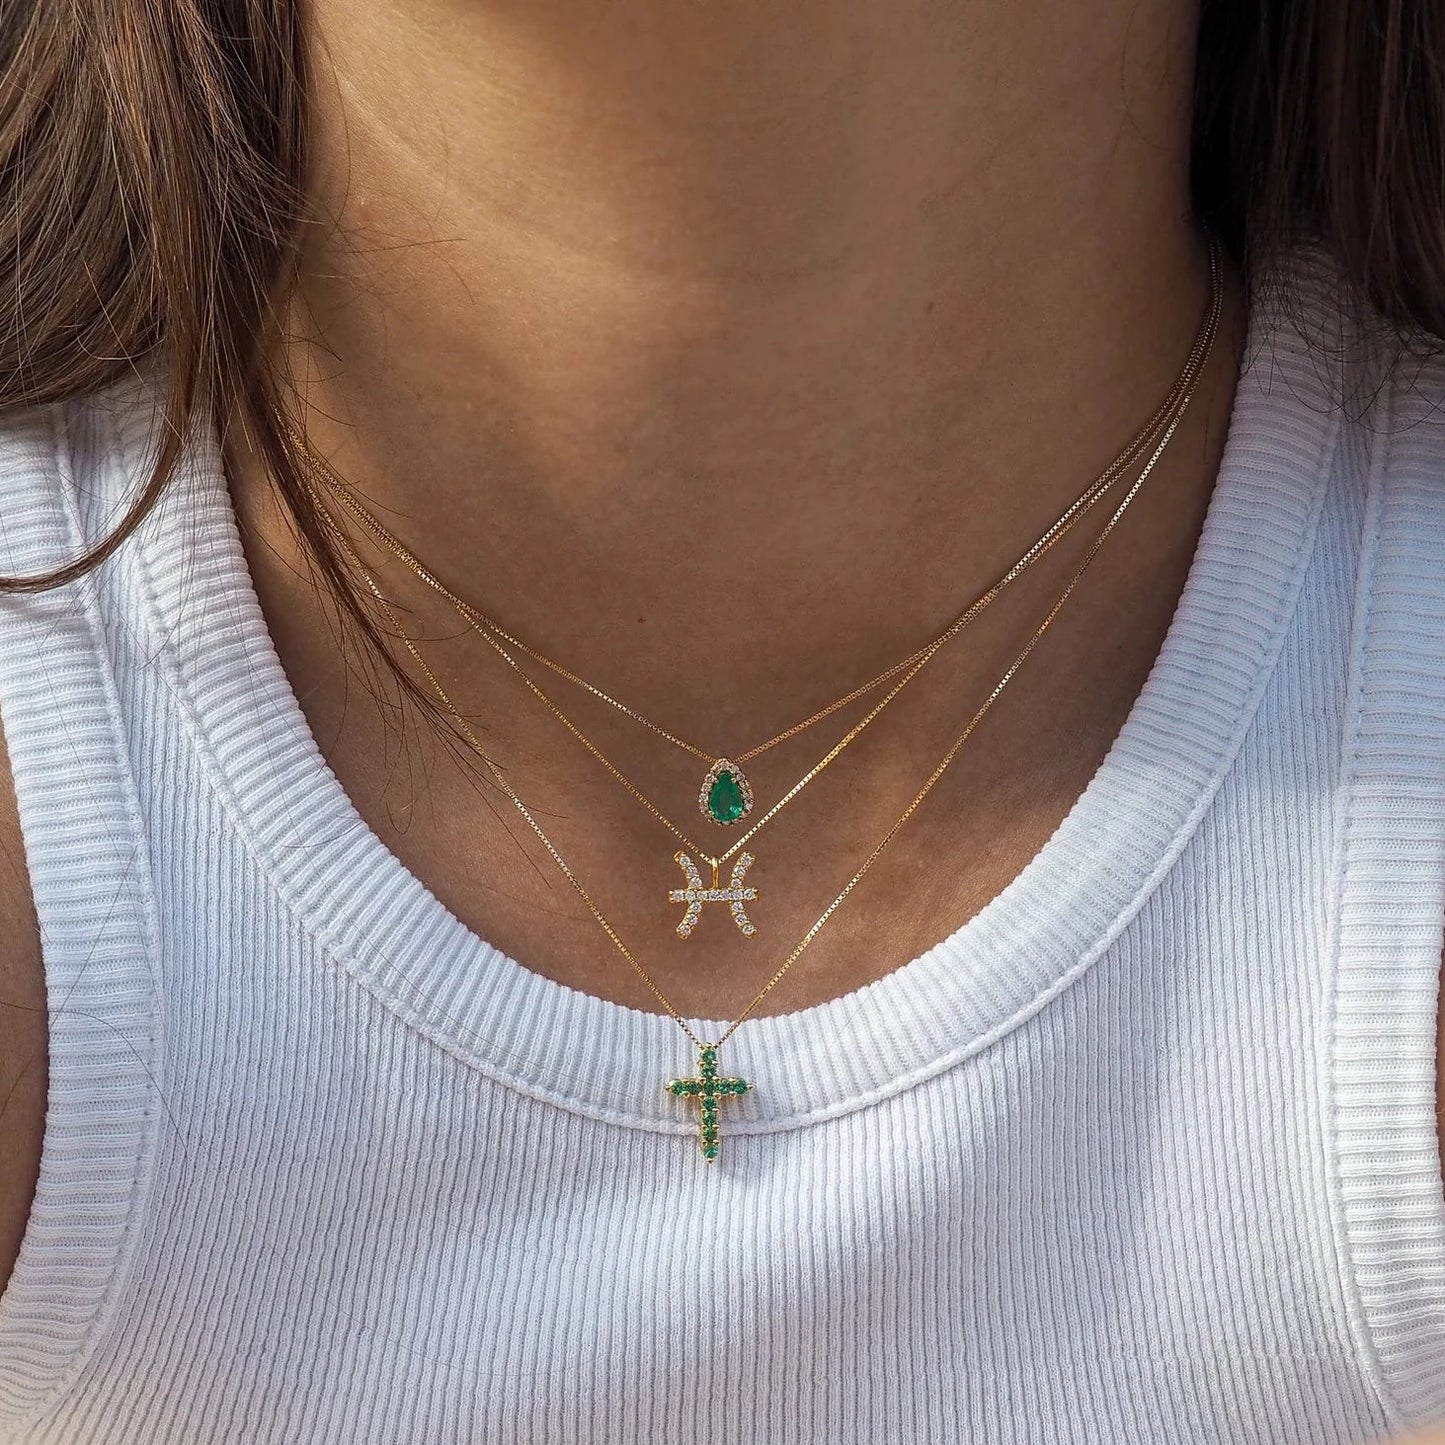 GOTHIC CROSS - 18k gold and emerald